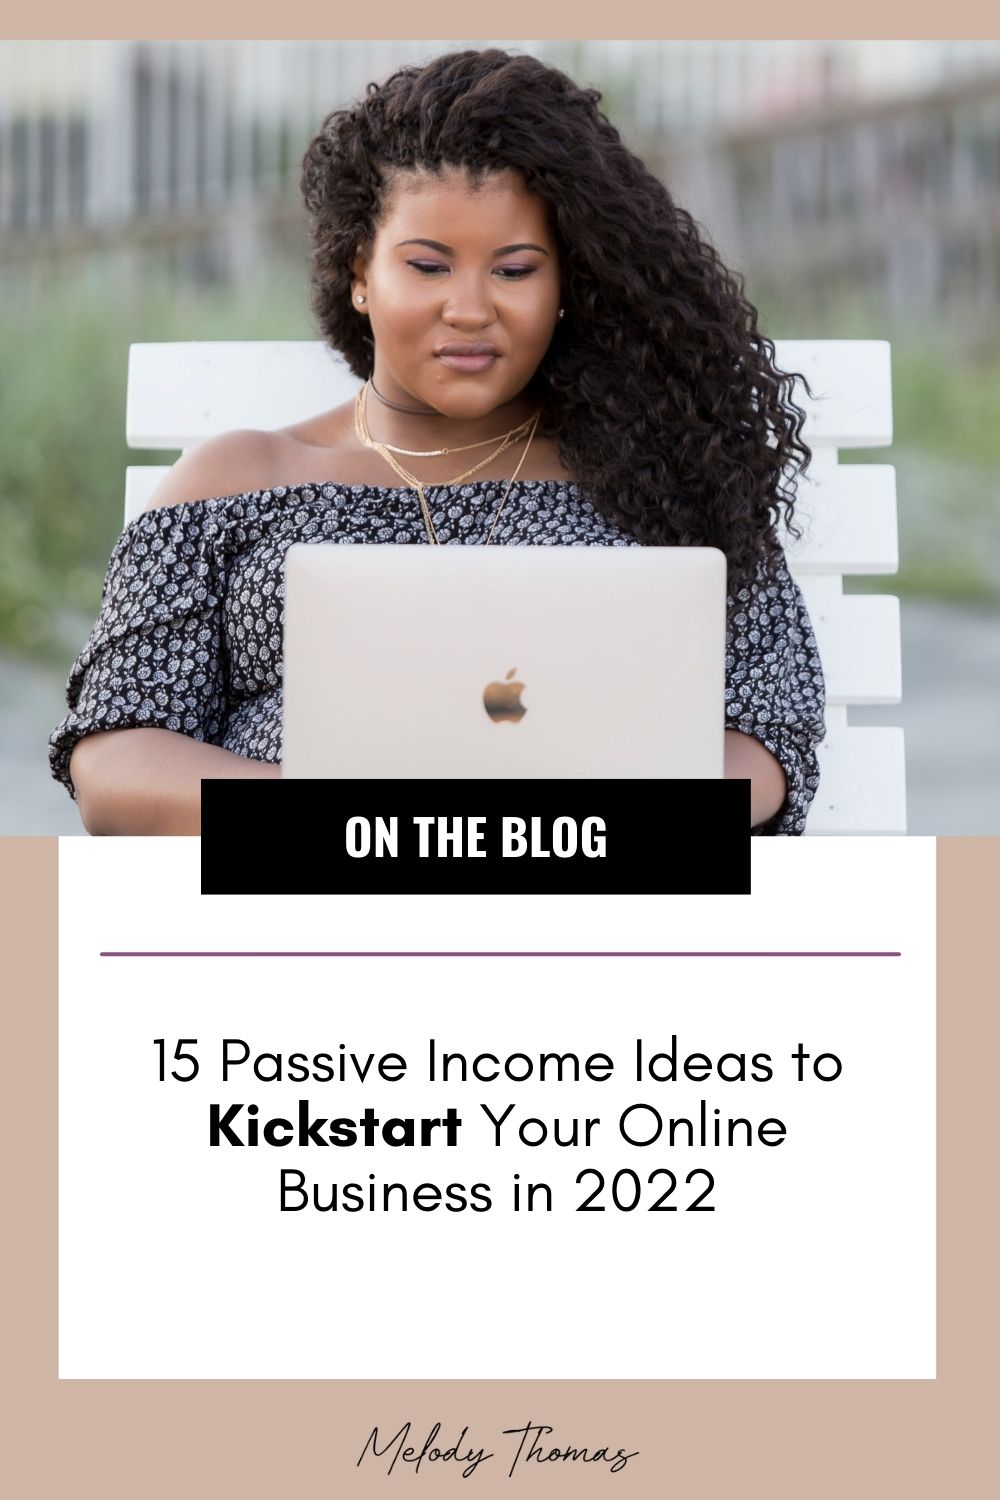 15 Passive Income Ideas to KickStart Your Online Business in 2022